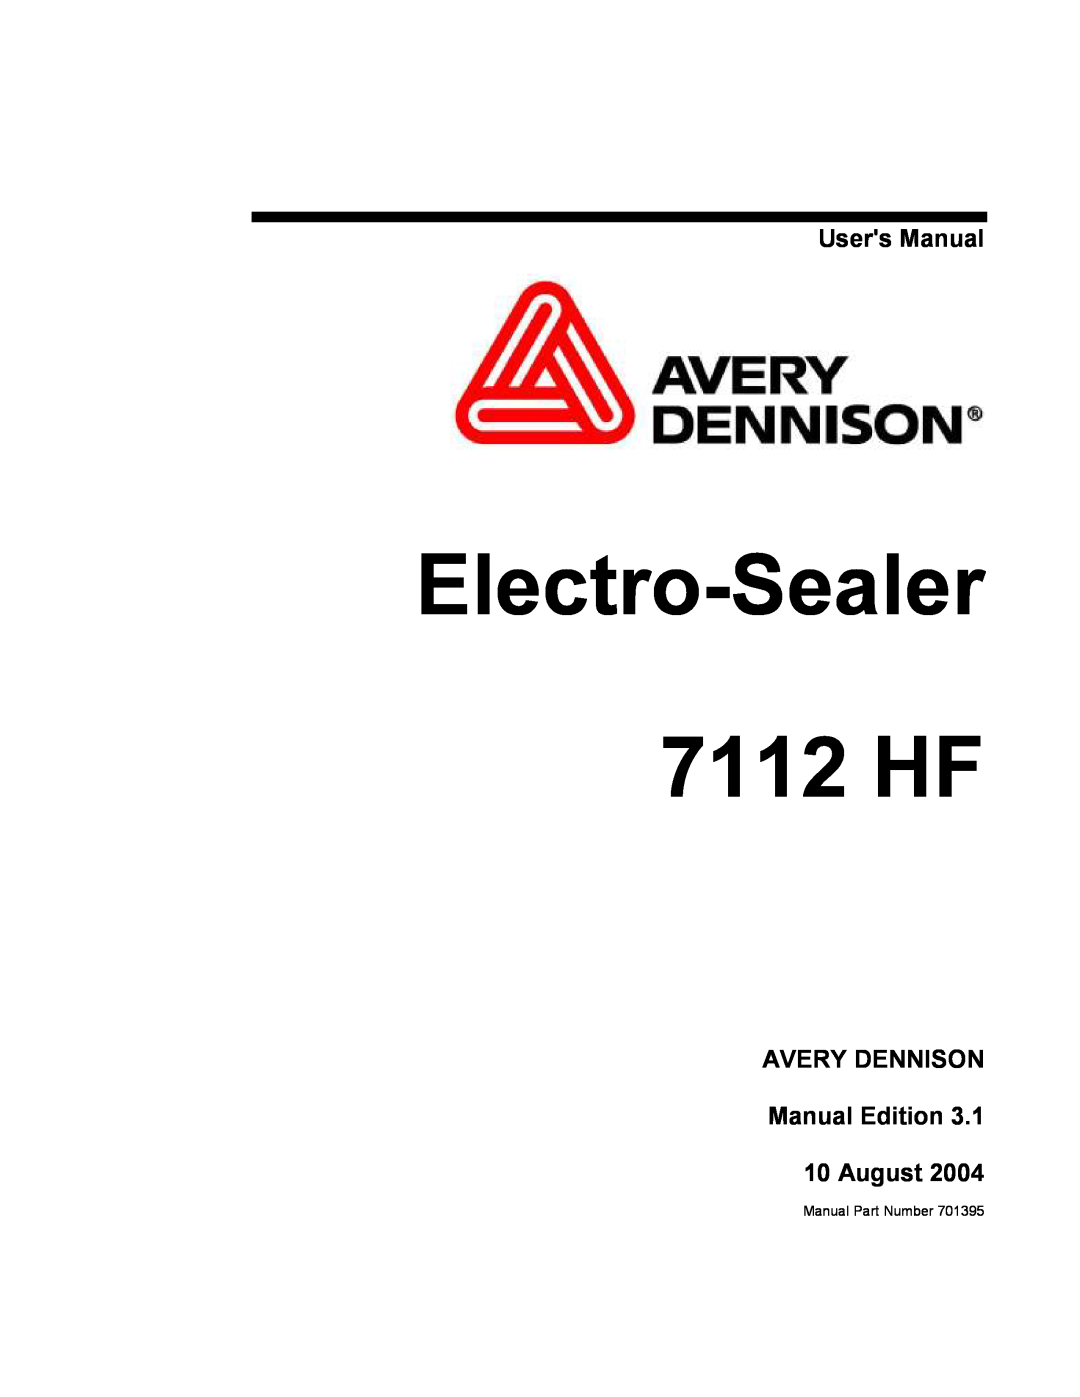 Avery user manual Users Manual, AVERY DENNISON Manual Edition 10 August, Electro-Sealer 7112 HF, Manual Part Number 